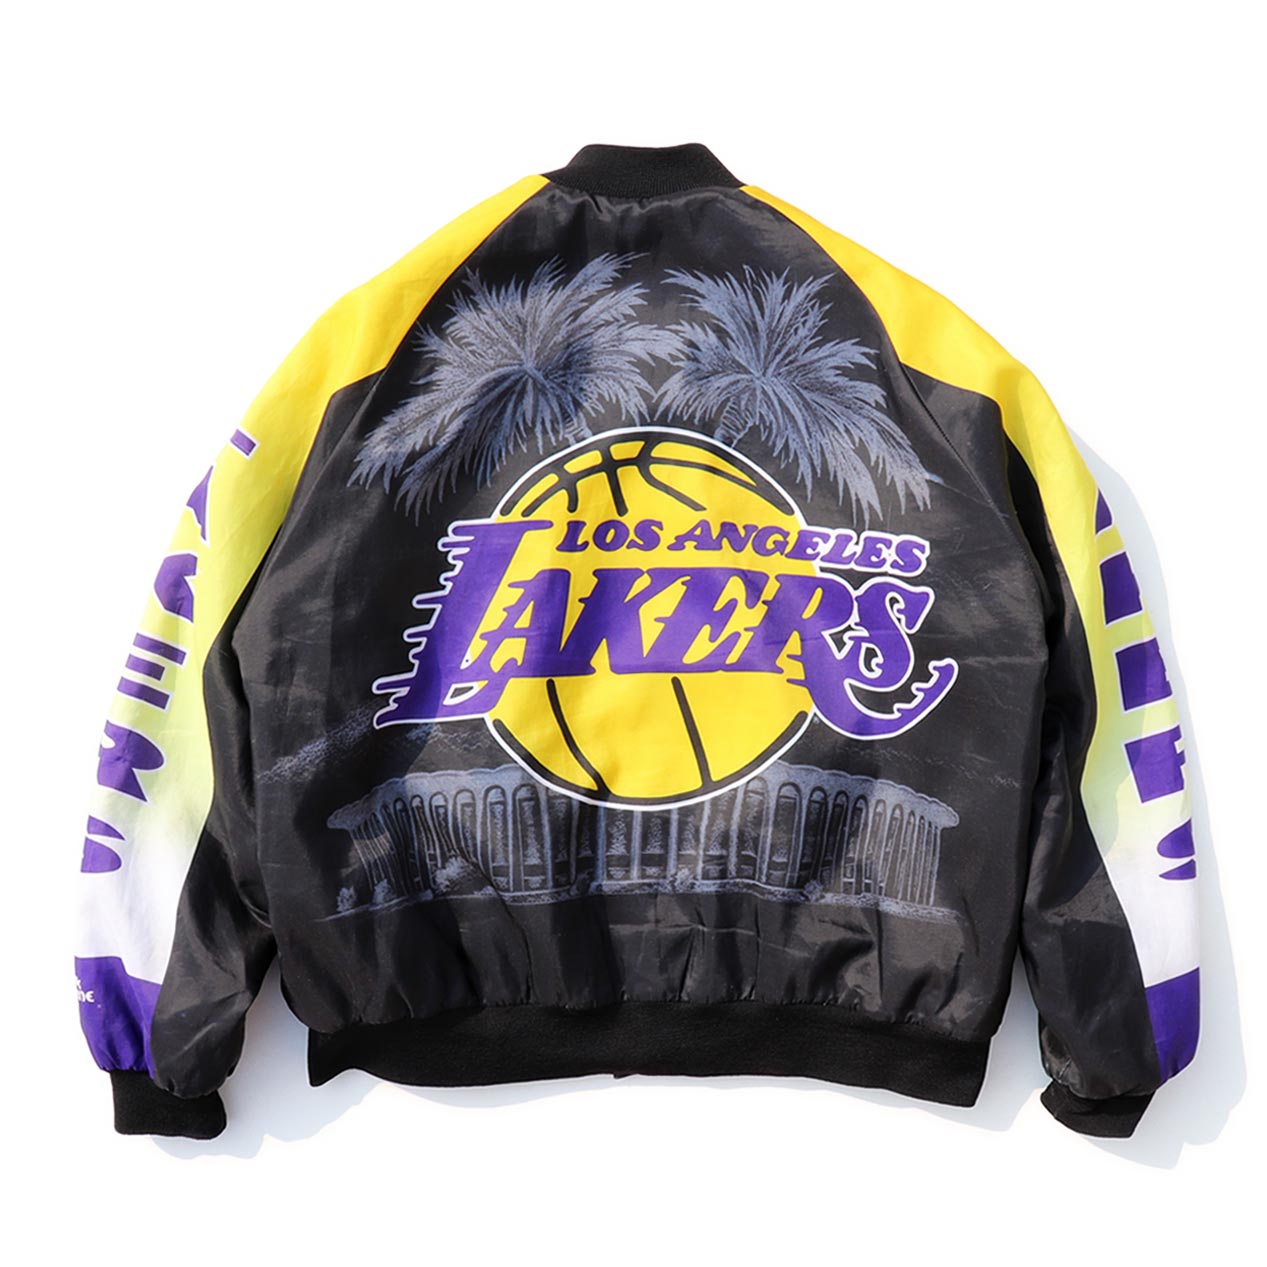 POST JUNK / 90's CHALK LINE ”LOS ANGELES LAKERS” USA製 スタジャン [XL]